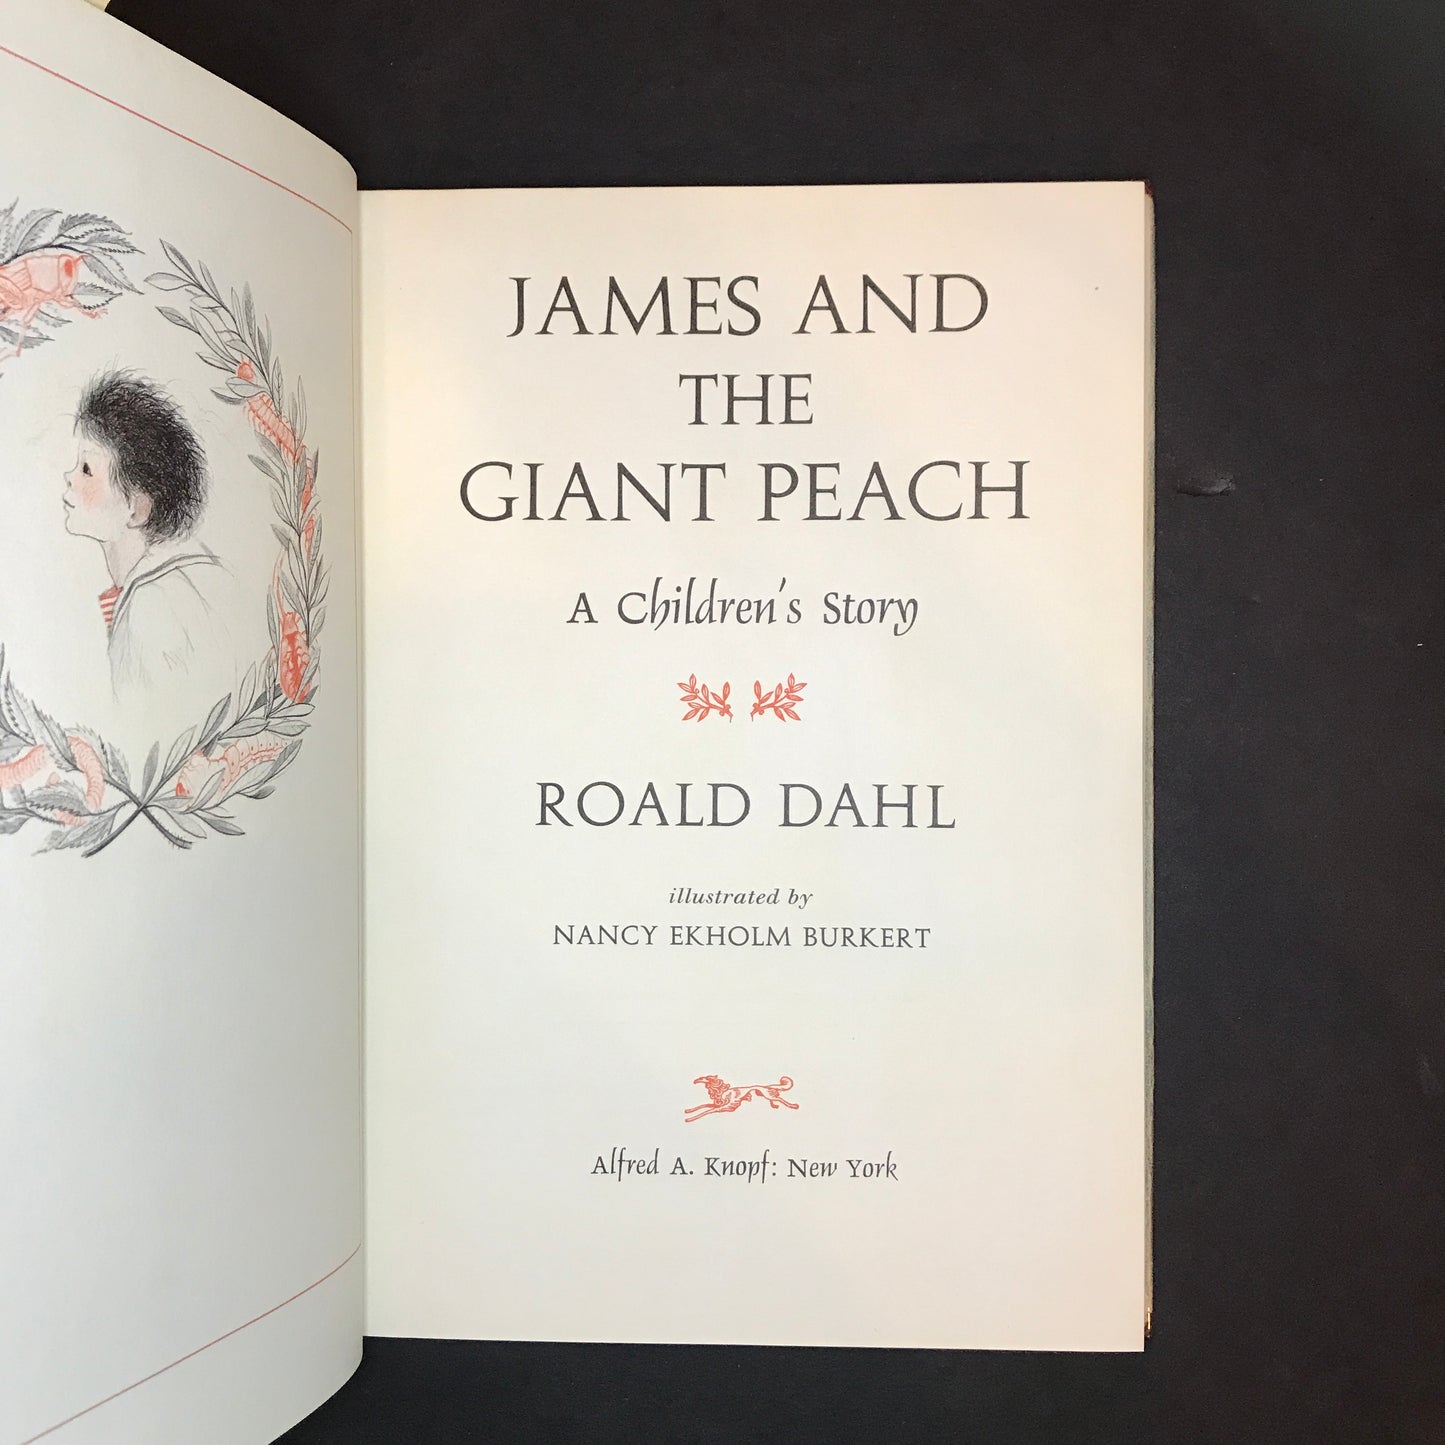 James and the Giant Peach - Roald Dahl - 1st Edition - 2nd Issue with a 1st Issue Dust Jacket - 4 Line Colophon containing "book press" - 1961